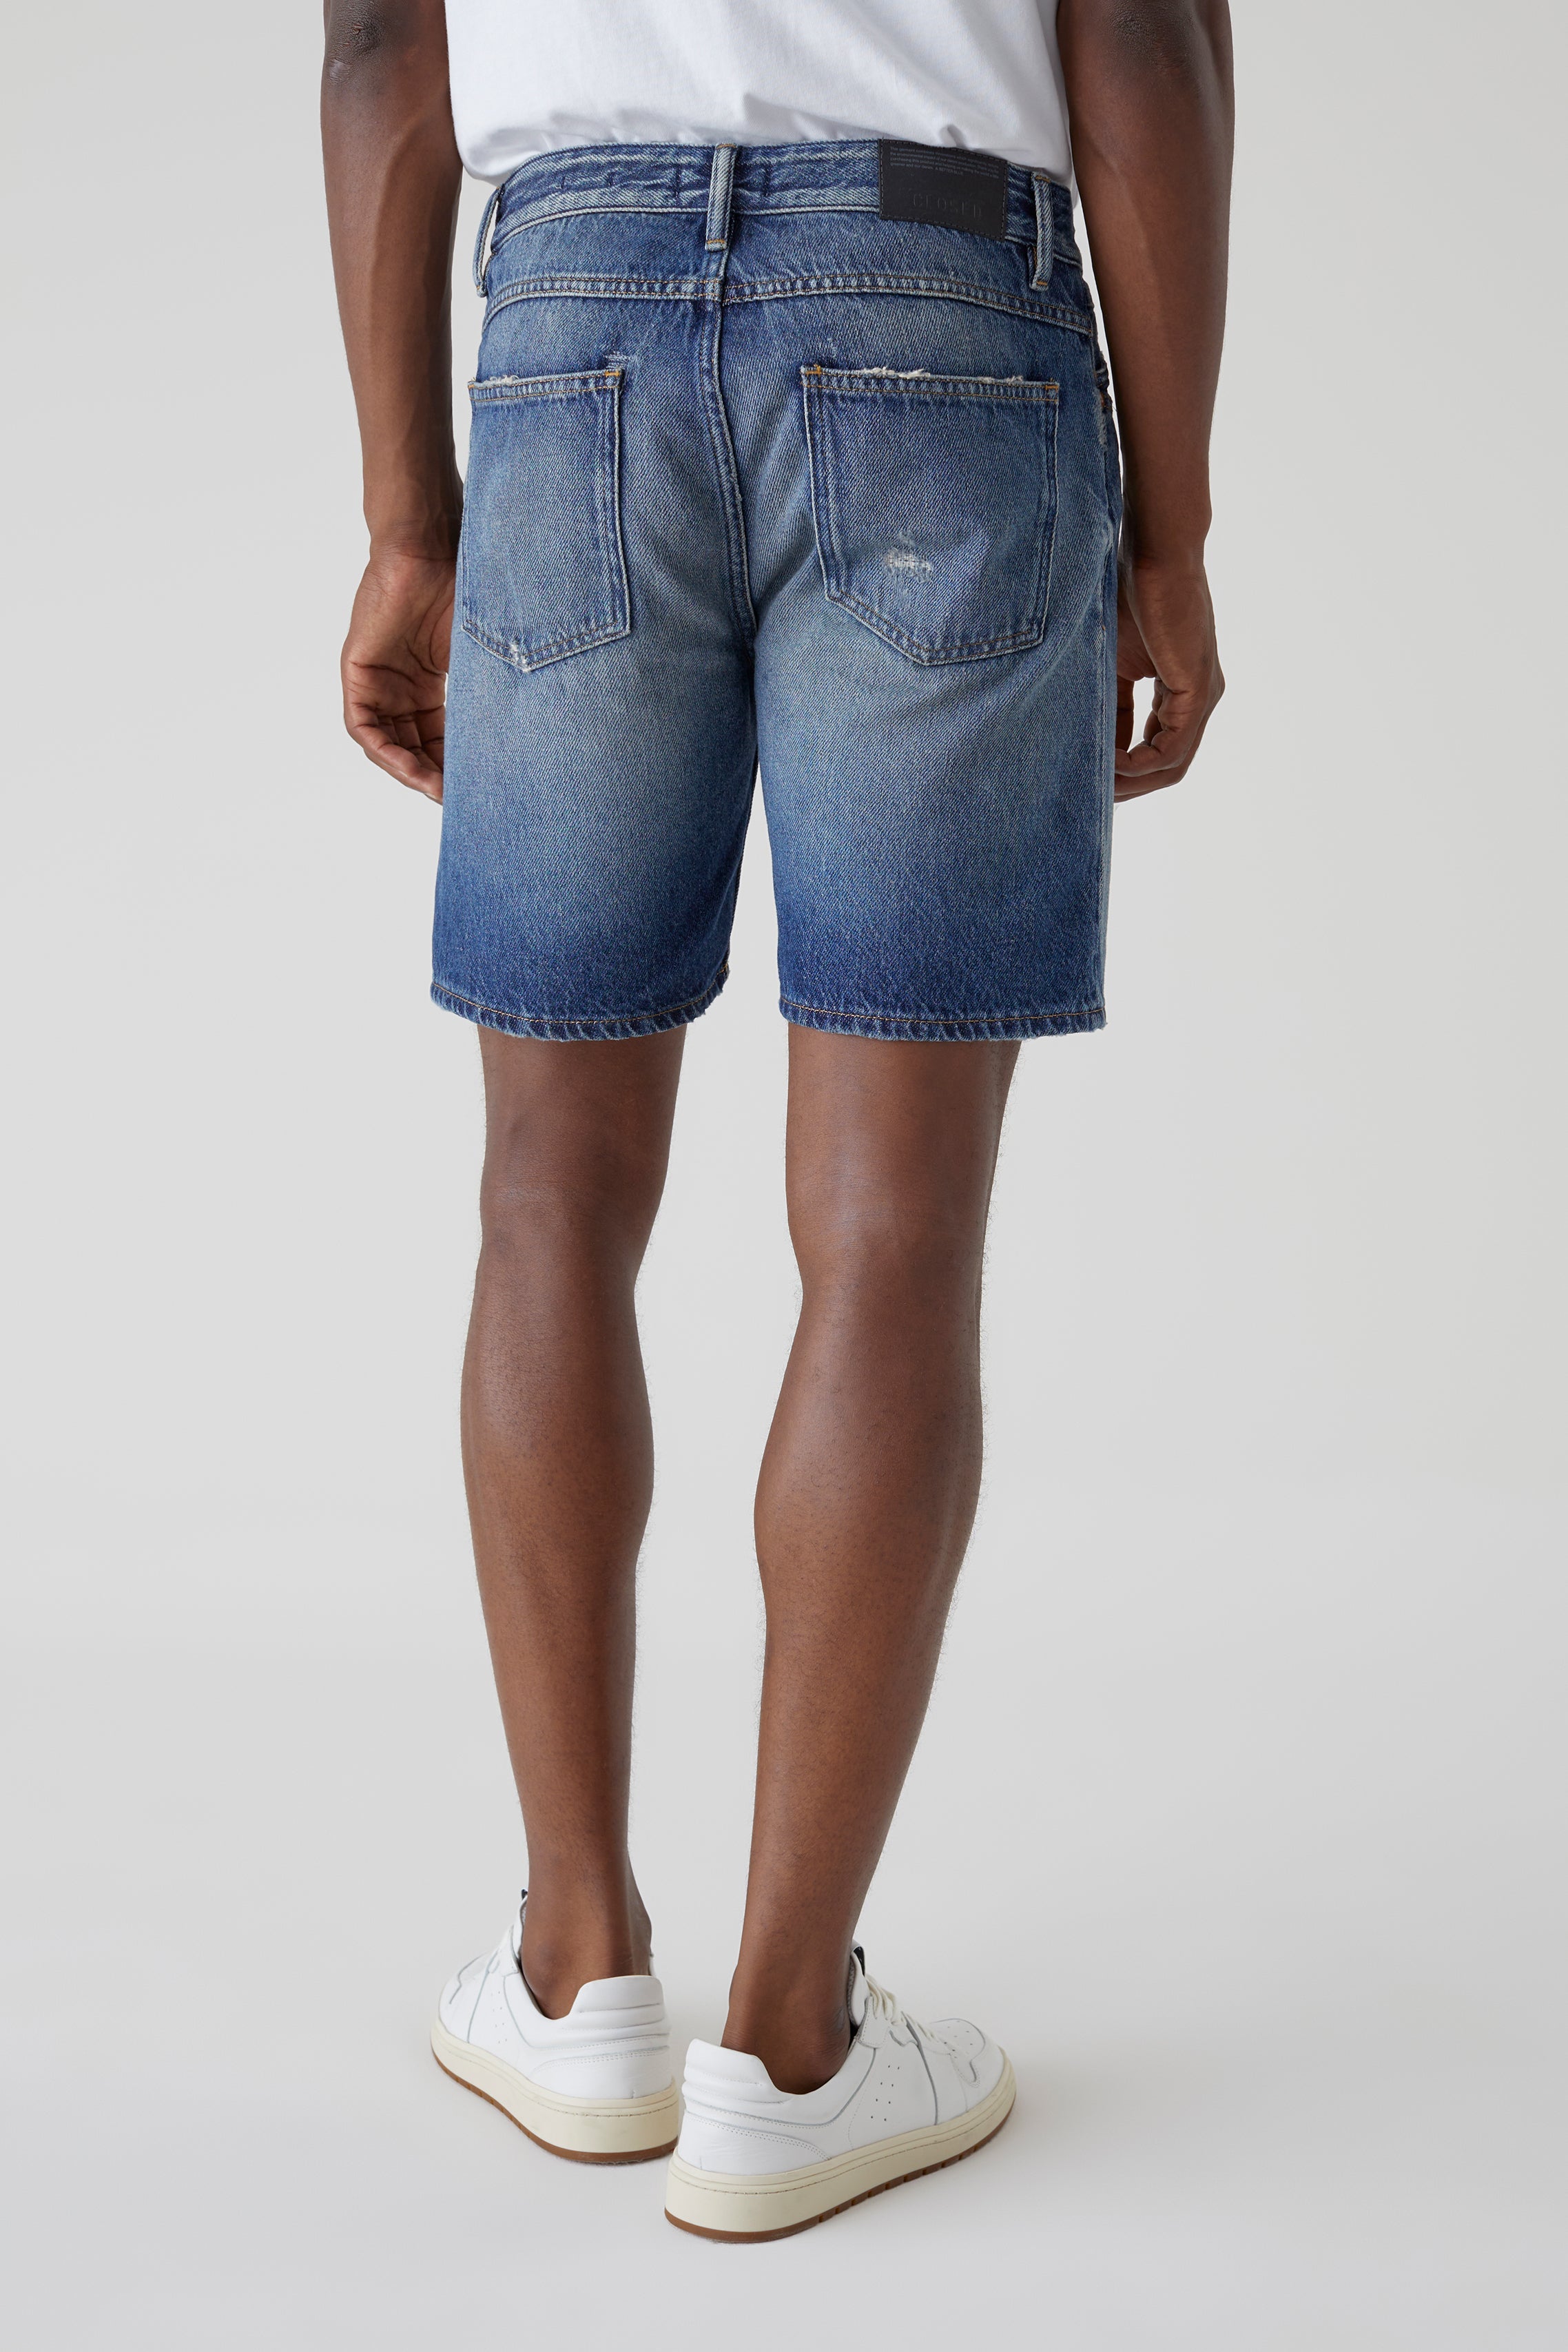 CLOSED-OUTLET-SALE-STYLE-NAME-BOGUS-SHORTS-Hosen-ARCHIVE-COLLECTION-4_5f521026-639e-43c1-9eef-1ba31b2630fd.jpg